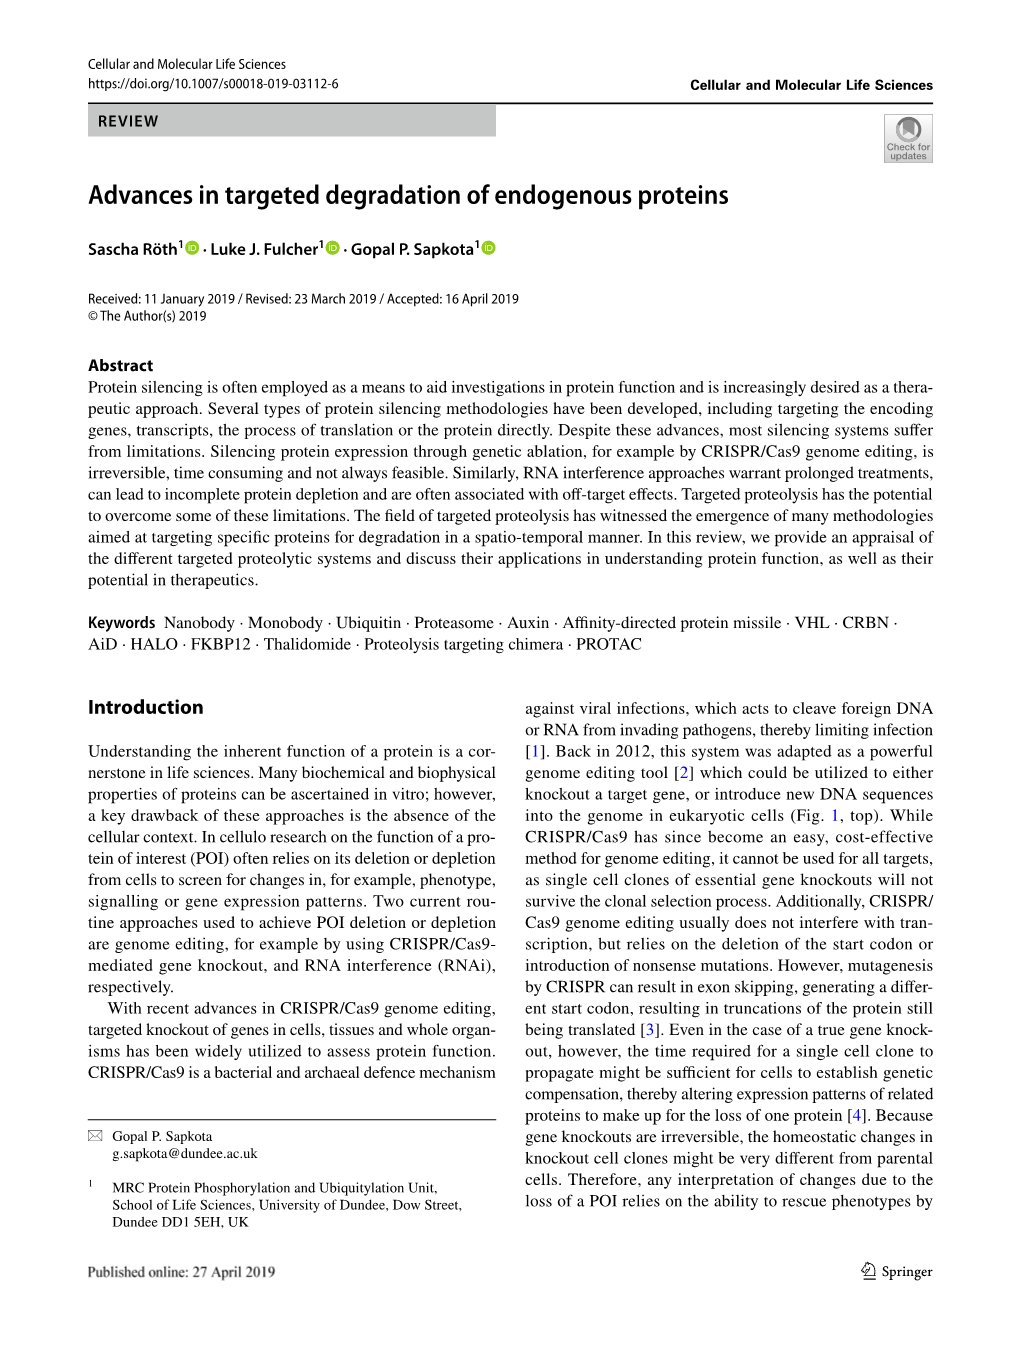 Advances in Targeted Degradation of Endogenous Proteins